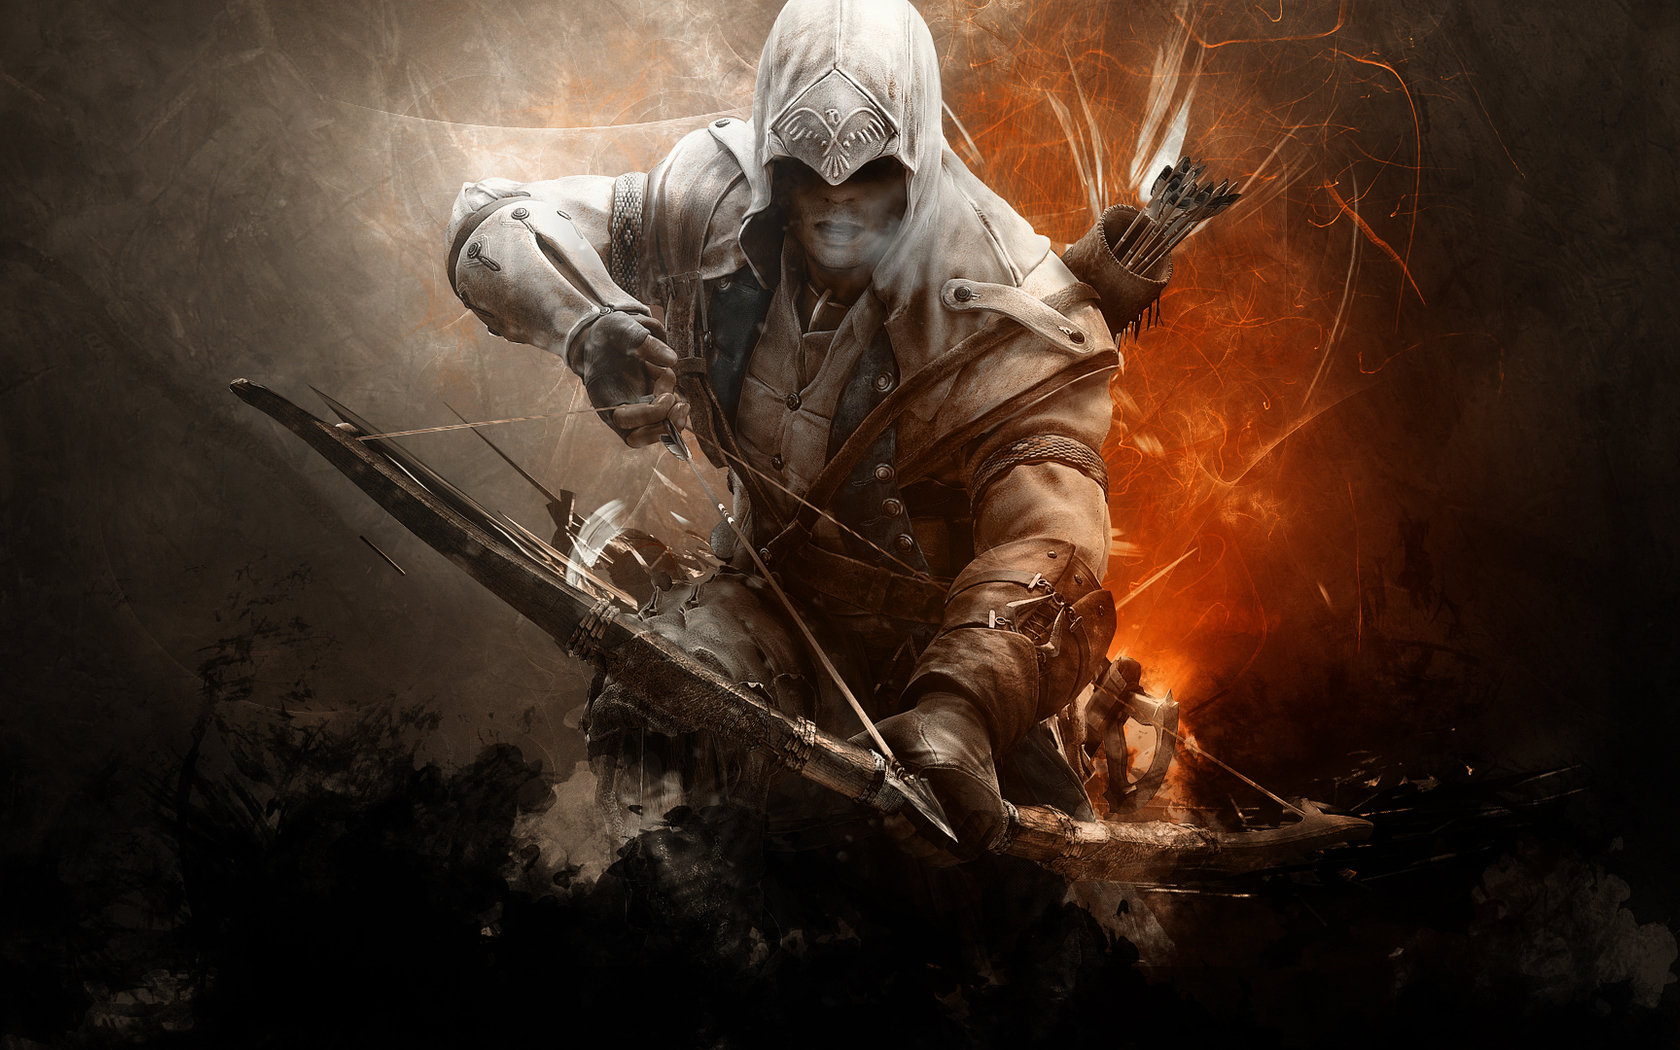 warrior, assassin's creed, video game, assassin's creed iii, arrow, bow